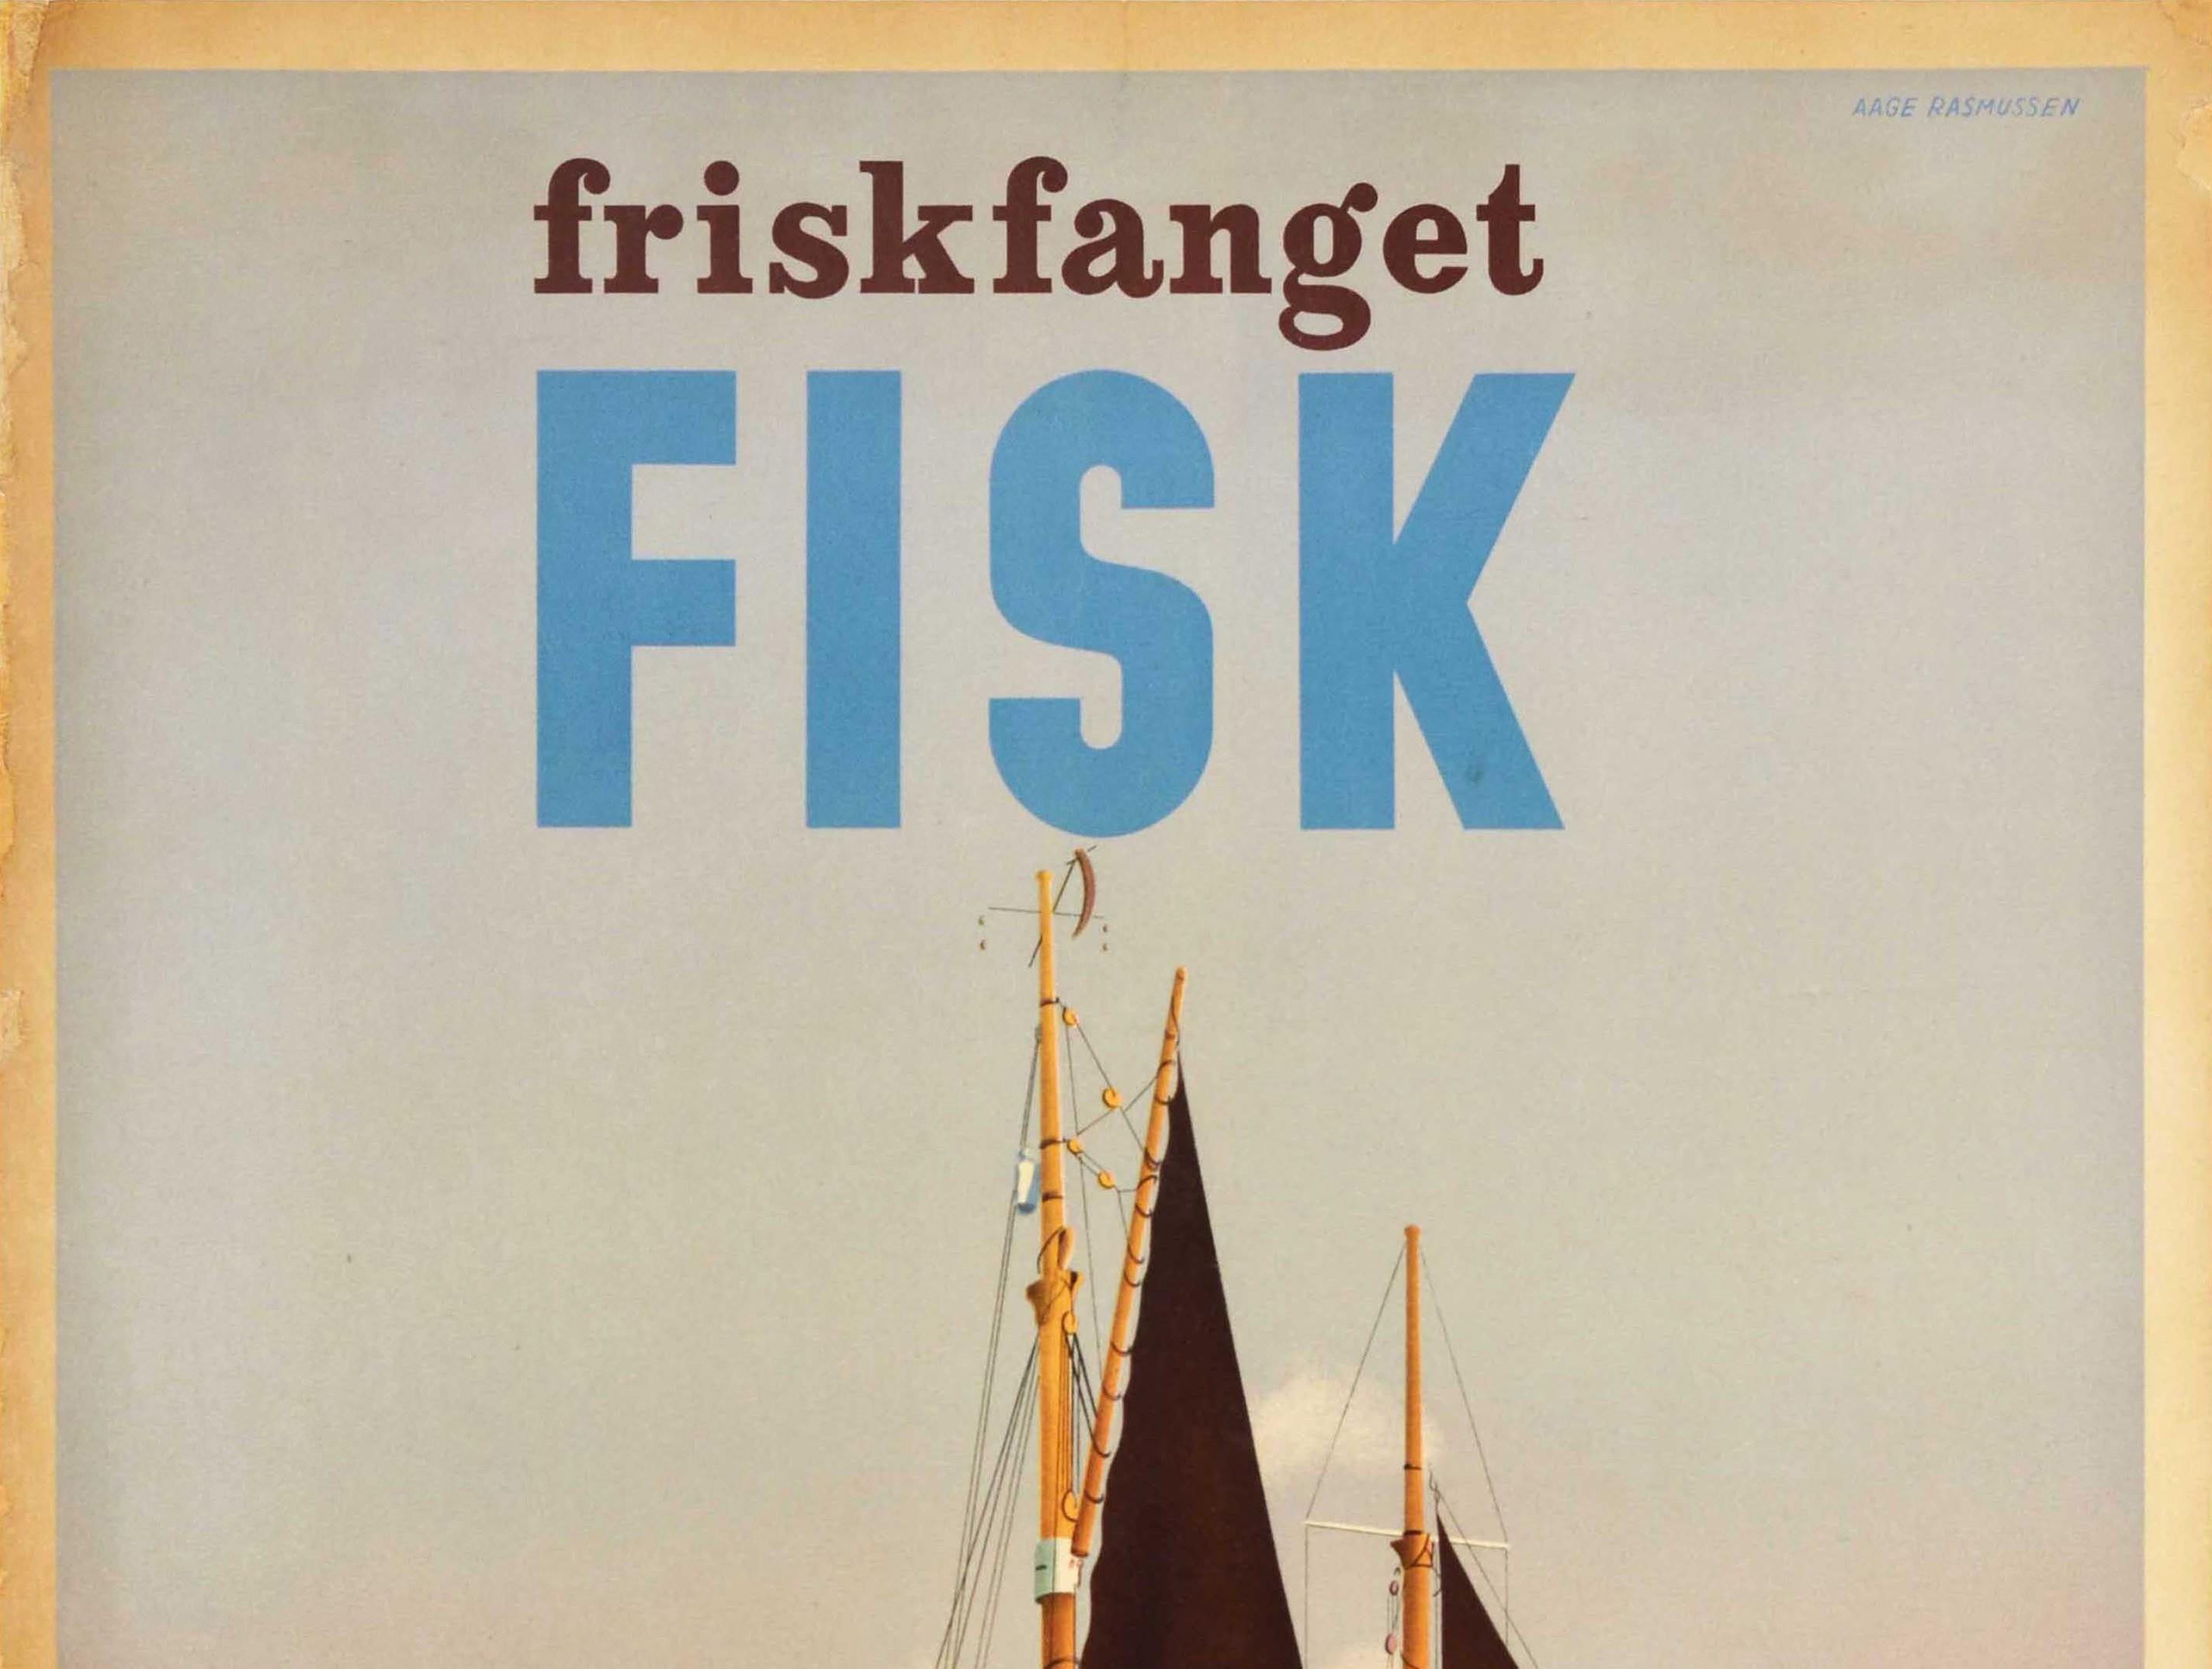 Original vintage poster - Friskfanget Fisk / Freshly caught fish - featuring artwork by the Danish artist Aage Rasmussen (1913-1975) depicting fishermen on their boats sailing back to shore with the title text on the sky above. Published by